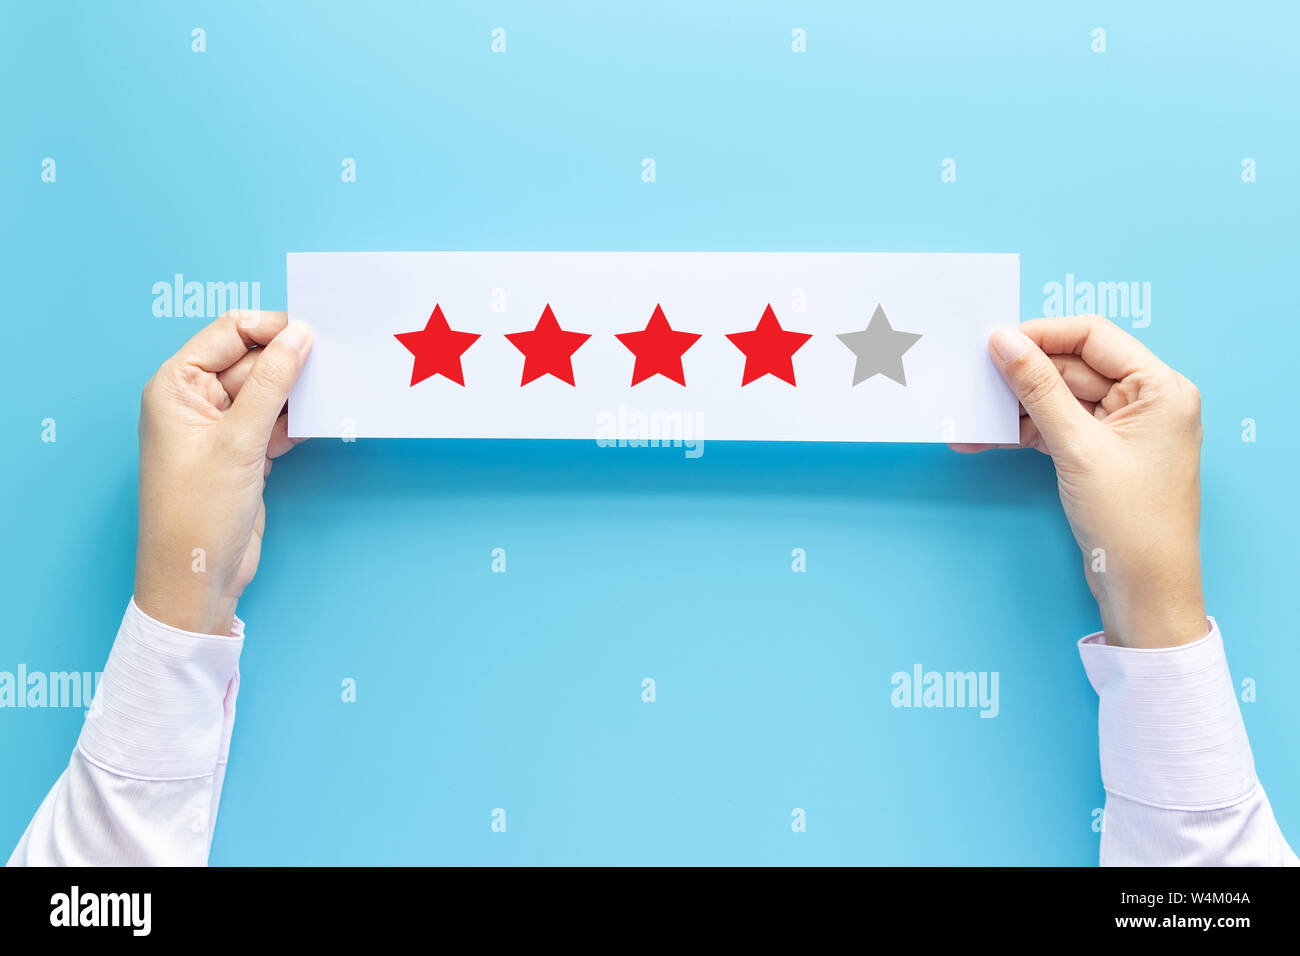 rating and feedback concept. customer holding paper with satisfied review by give star for service experience Stock Photo